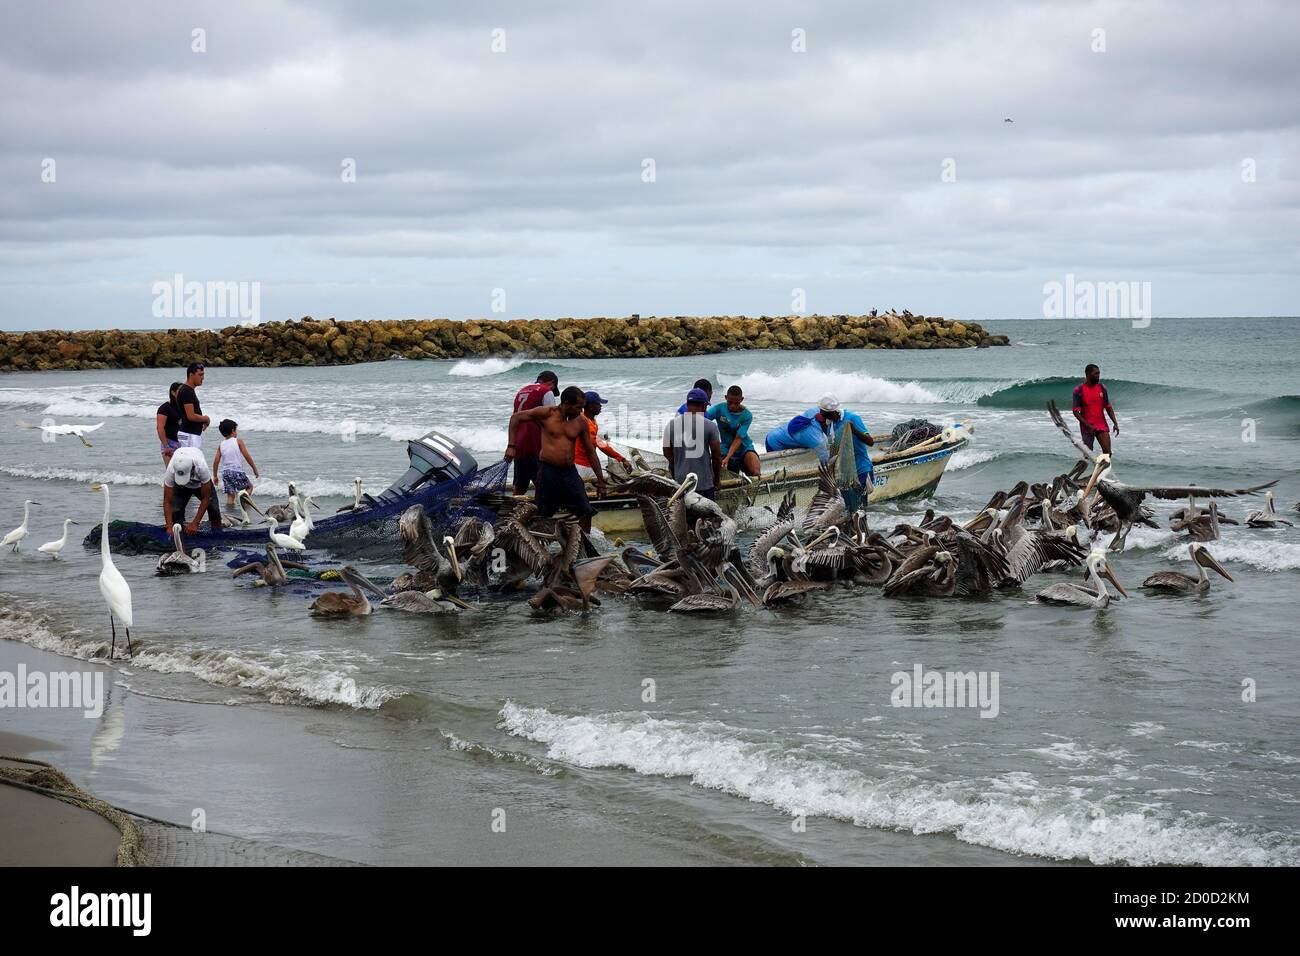 Cartagena, Bolívar/ Colombia; 09/30/2020: Fisher bringing the nets in at Bocagrande beach. Men working in artisanal fishing followed by pelican 2020 Stock Photo